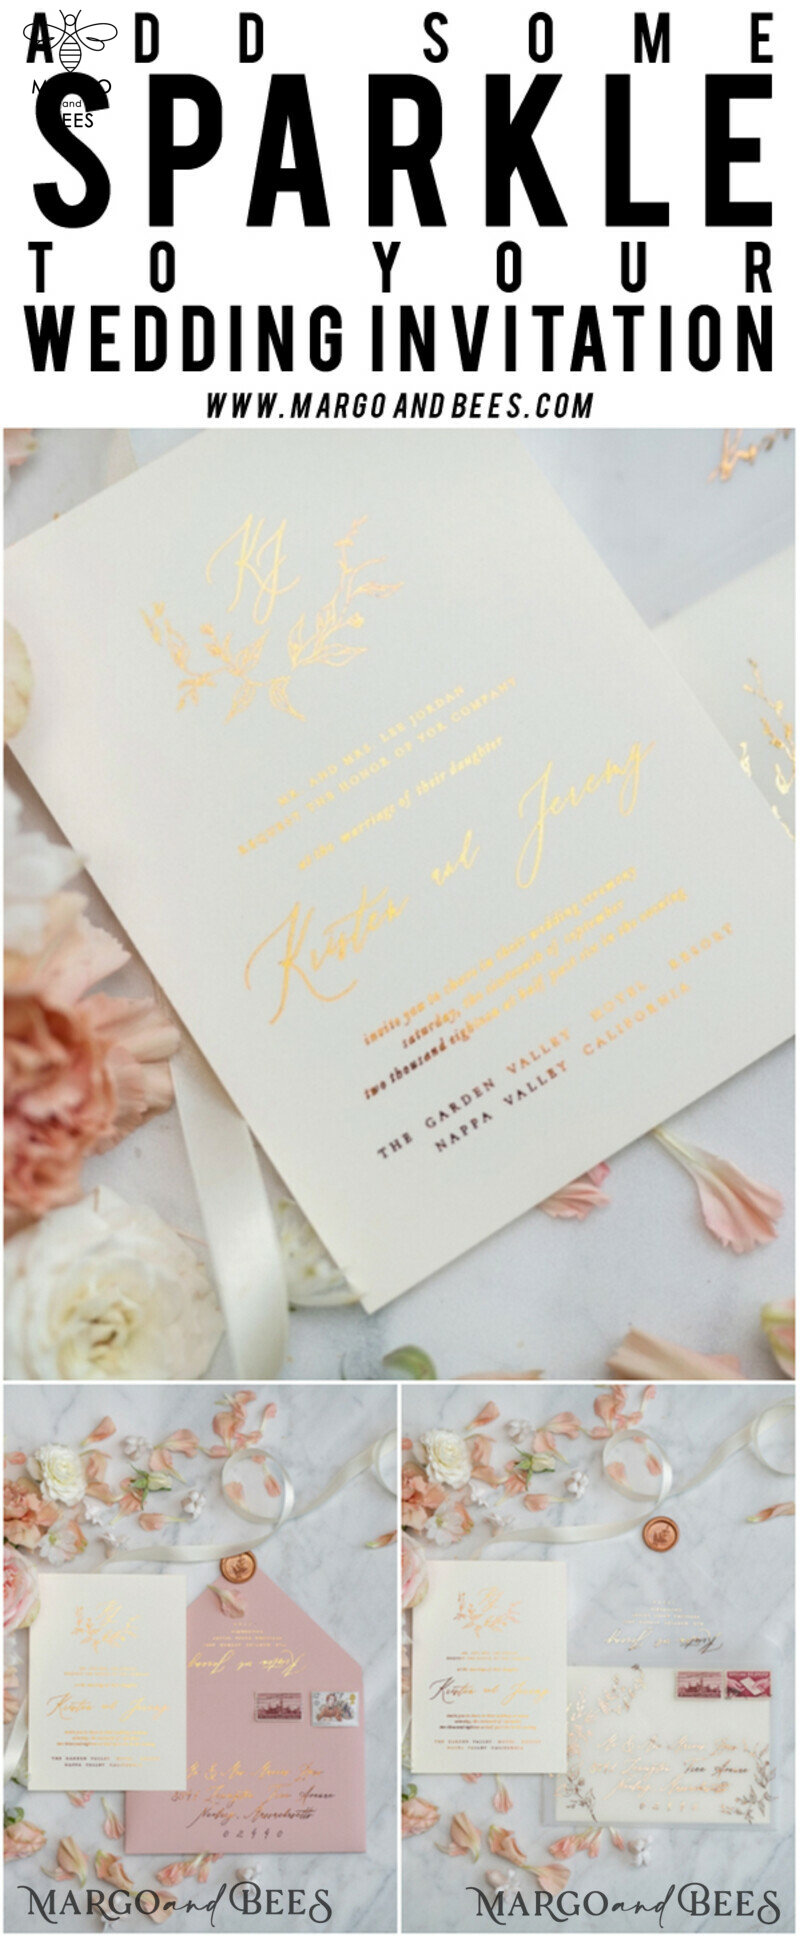 Stunning Blush Pink Wedding Invitations with Glamourous Gold Foil Accents and Elegant Vellum Details: A Bespoke Wedding Invitation Suite-41